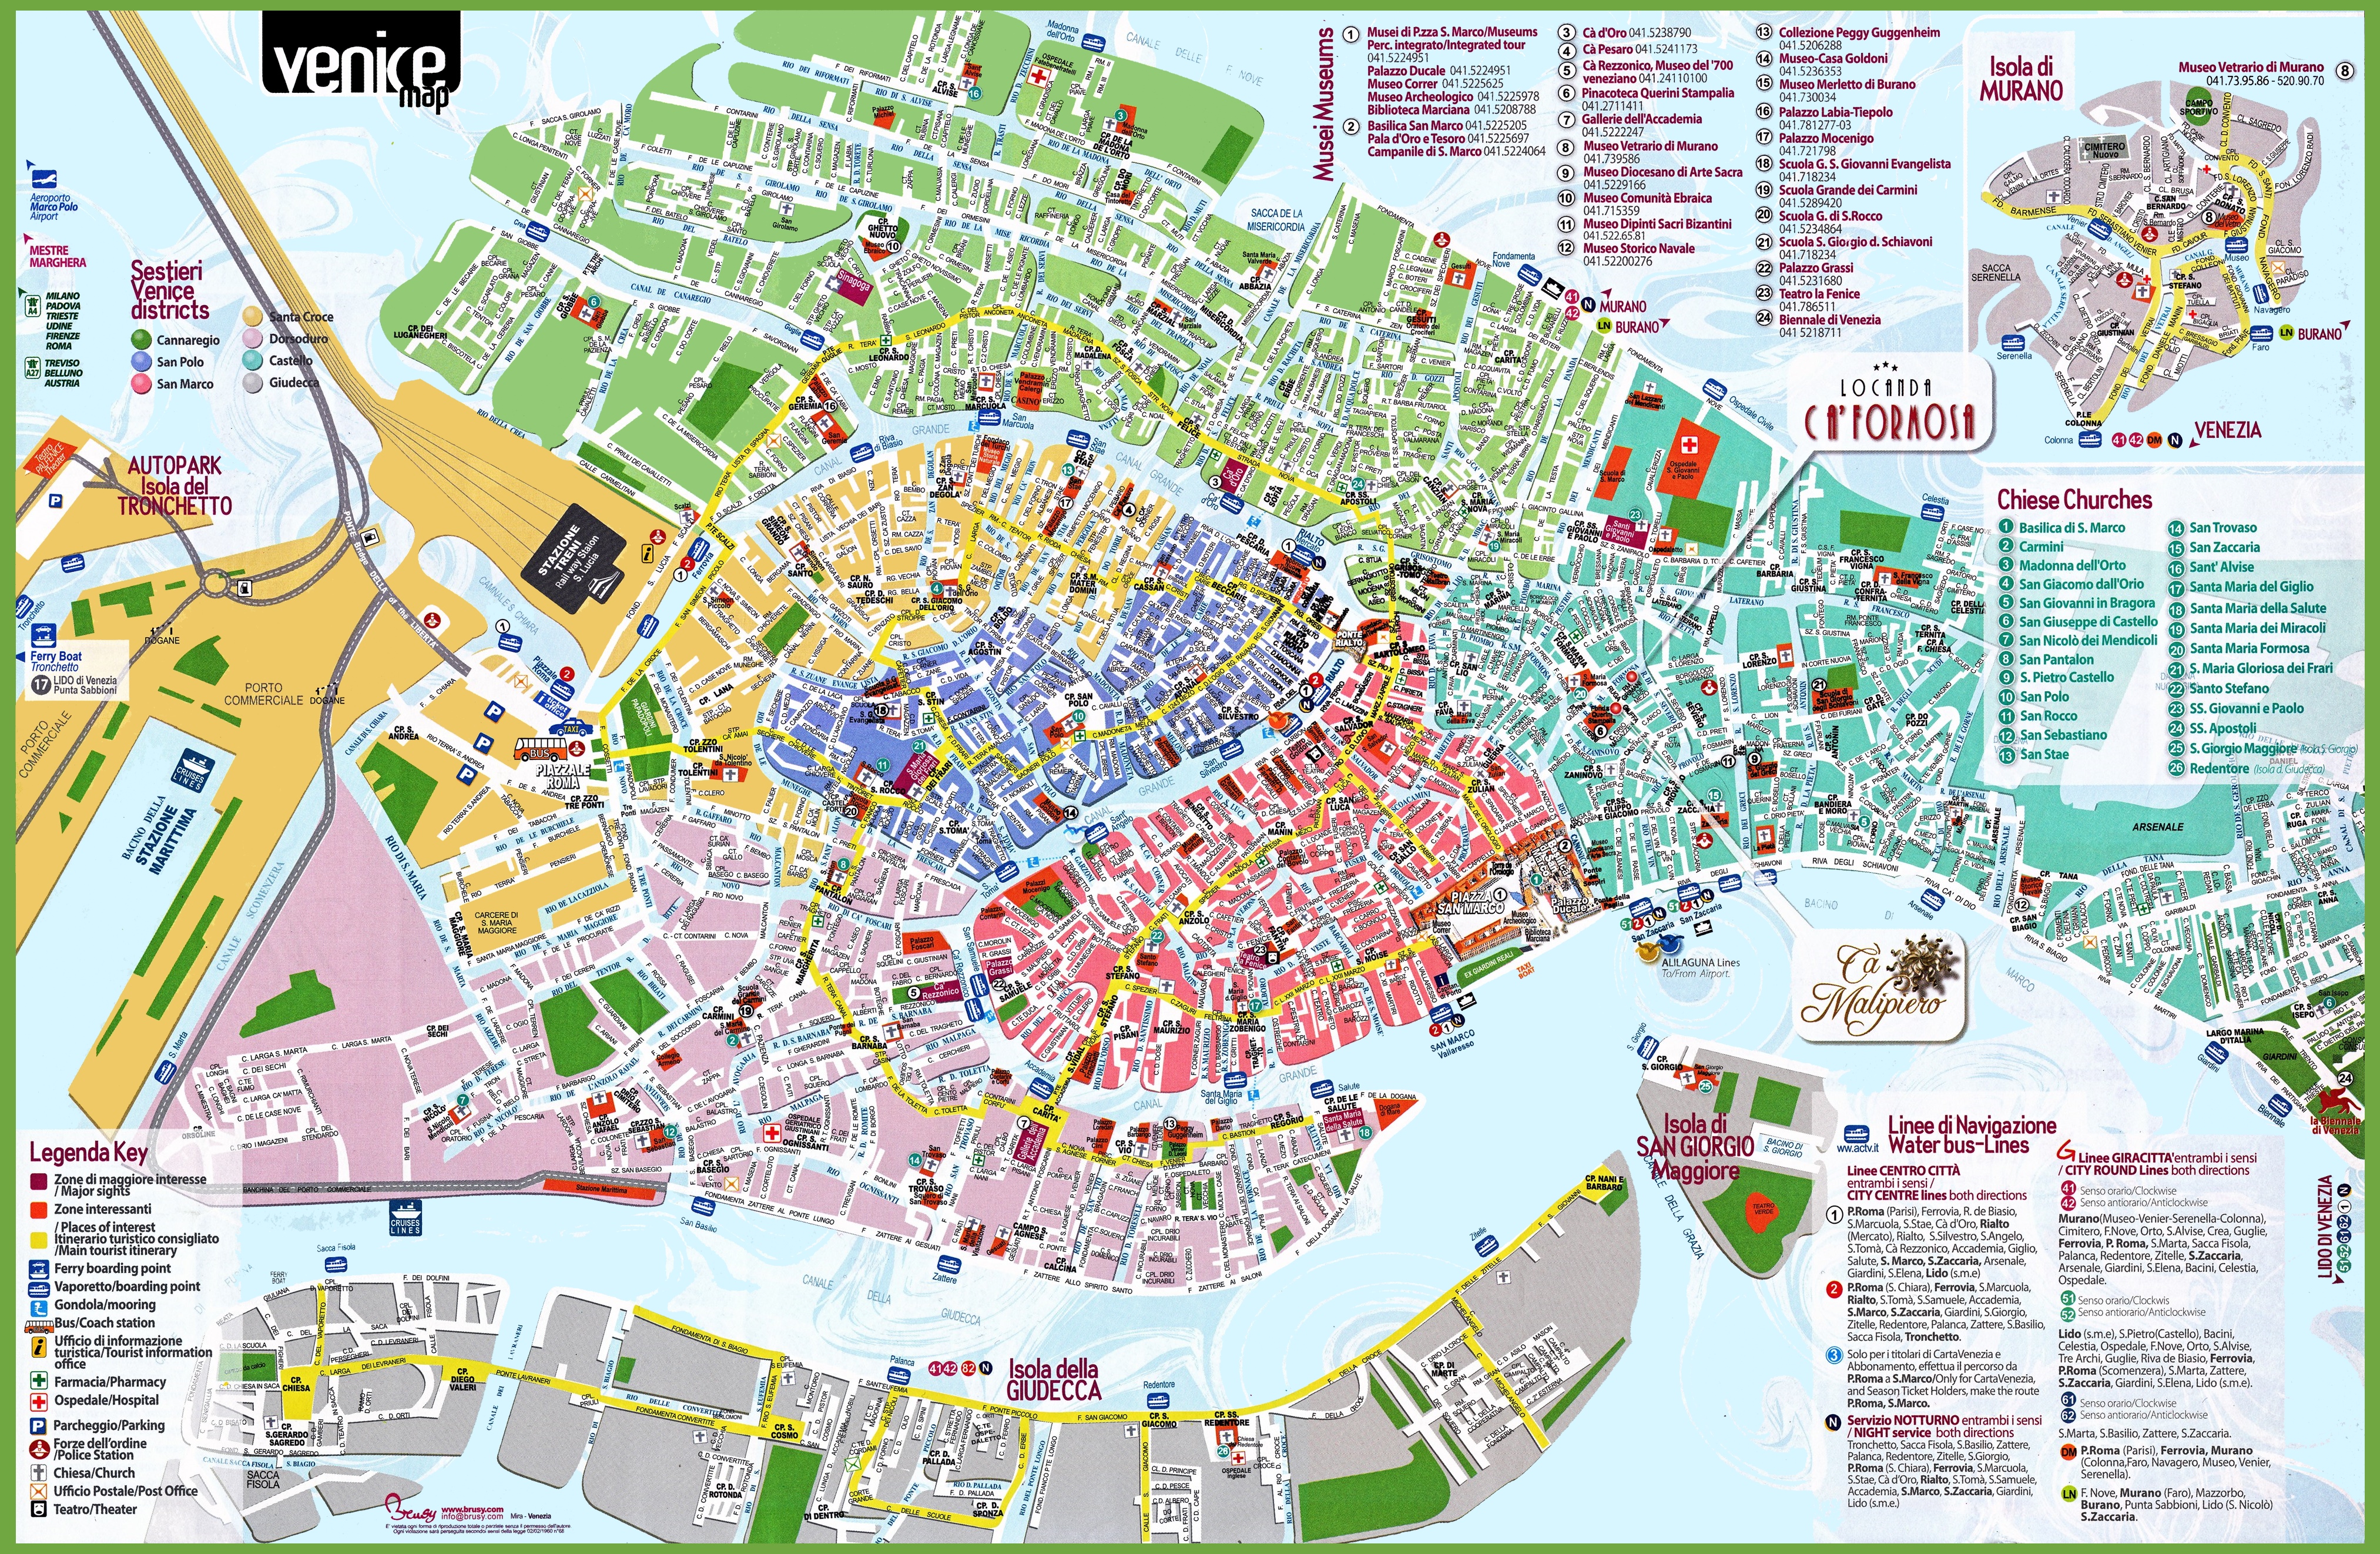 Venice Attractions Map PDF - FREE Printable Tourist Map Venice, Waking